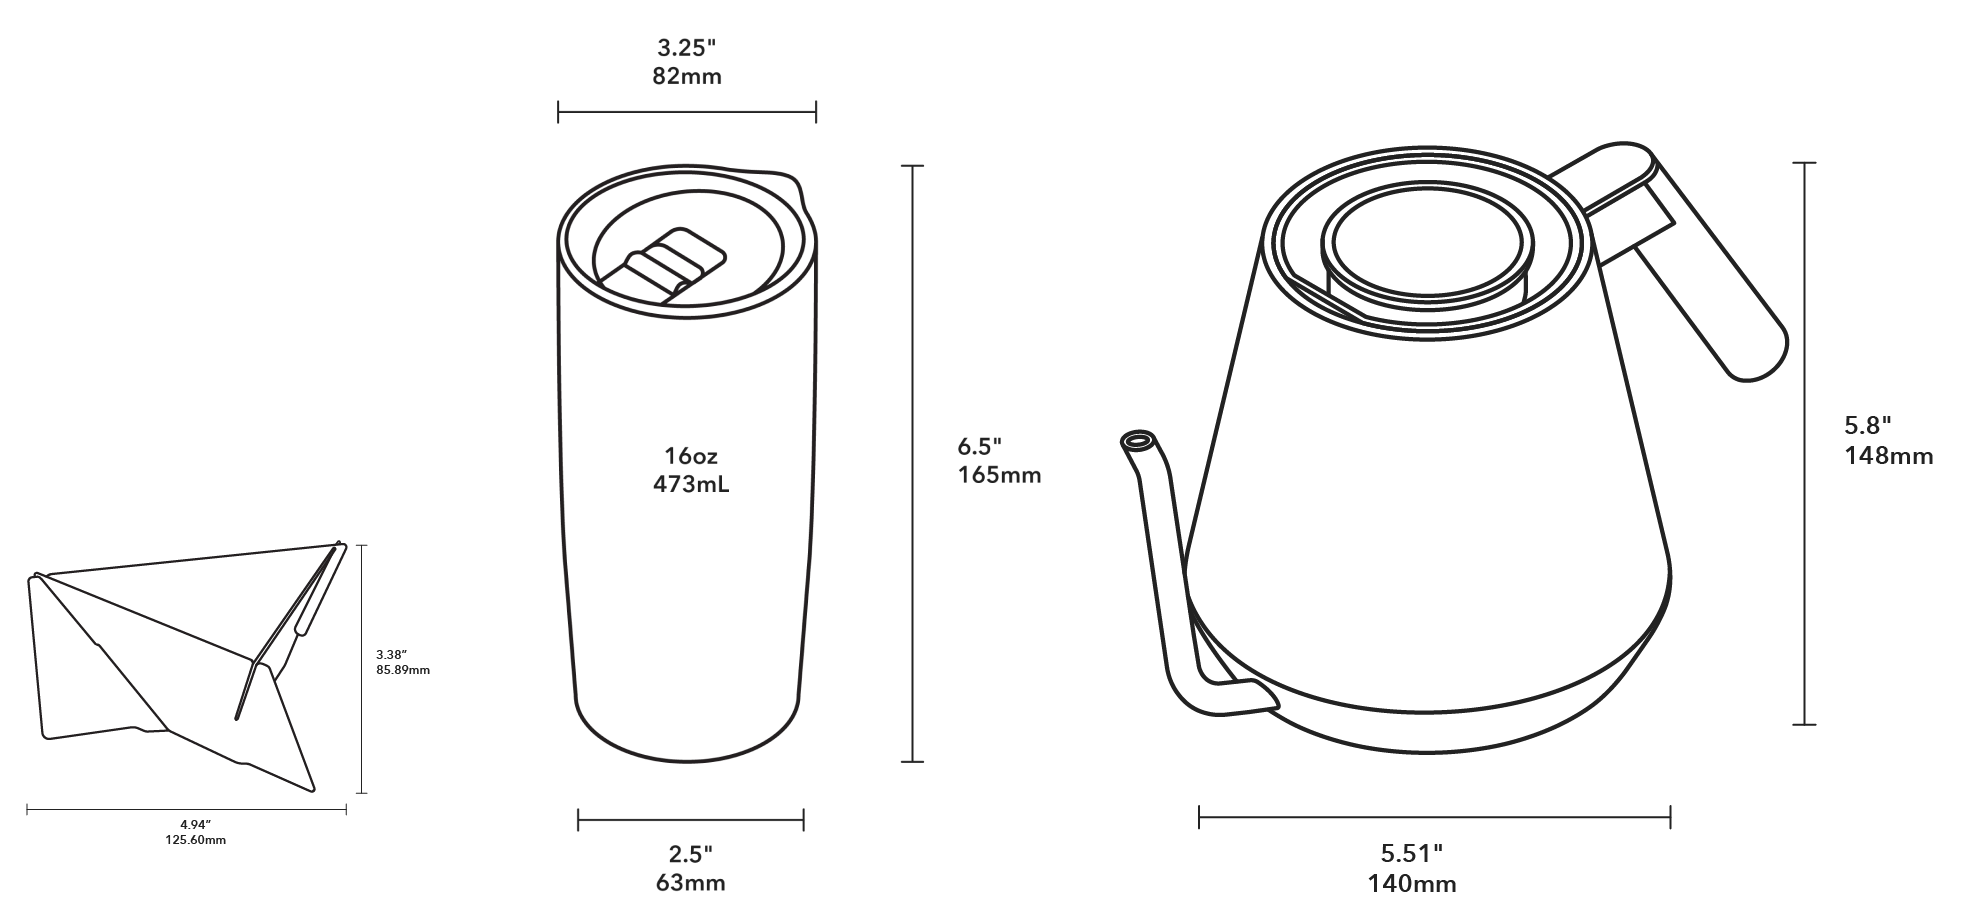 https://cdn.shopify.com/s/files/1/1416/9810/files/TUMBLER_POUR-OVER_Kit_Dimensions_Line_Drawing.png?v=1663123669